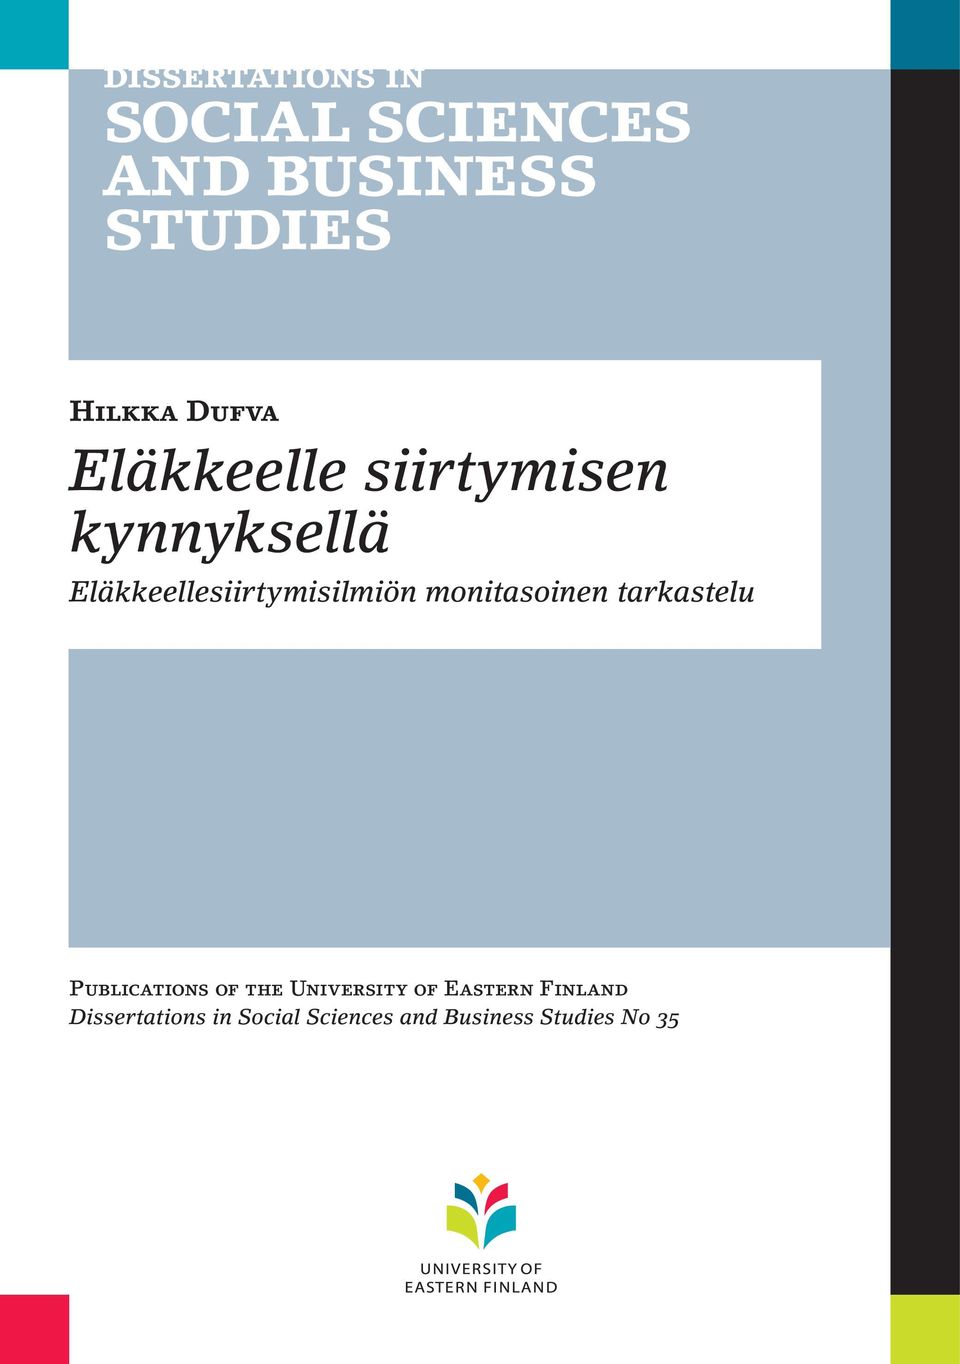 Publications of the University of Eastern Finland